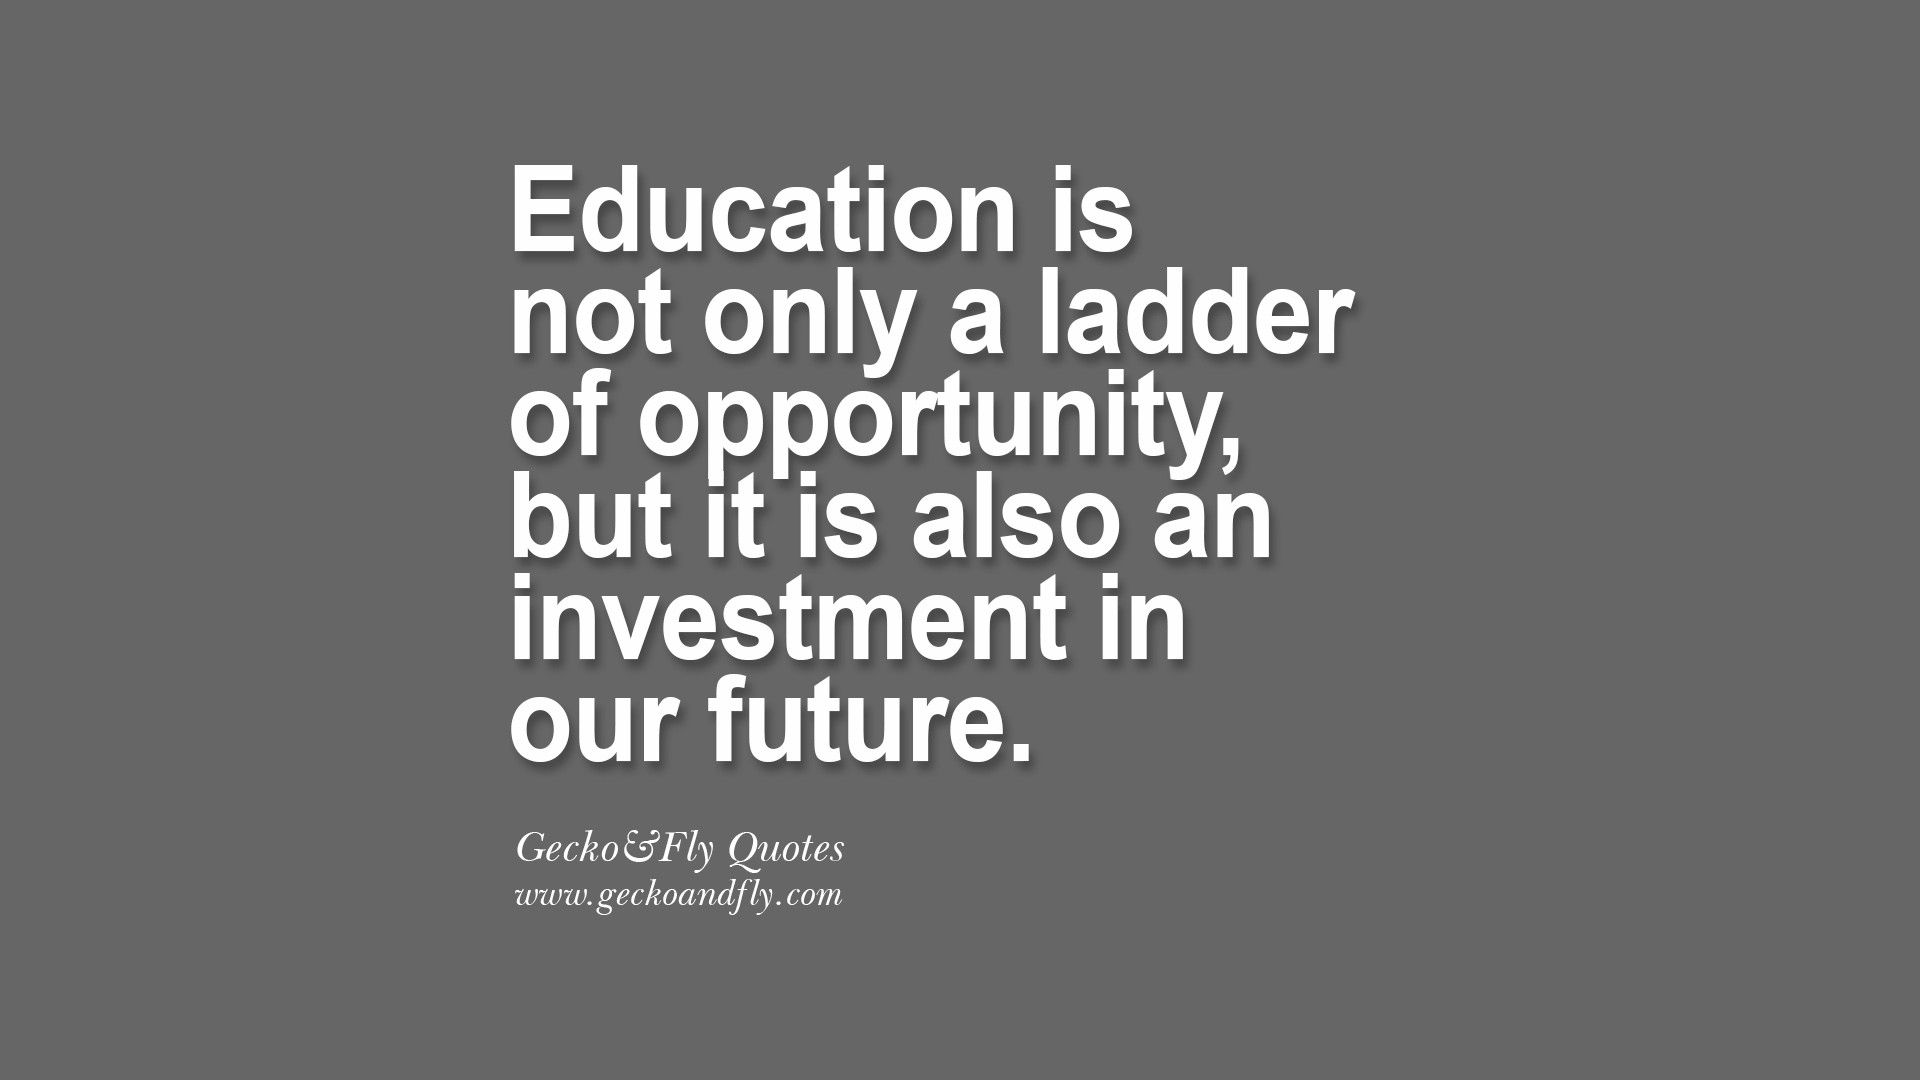 Quotes About Education Importance
 Importance Early Education Quotes QuotesGram